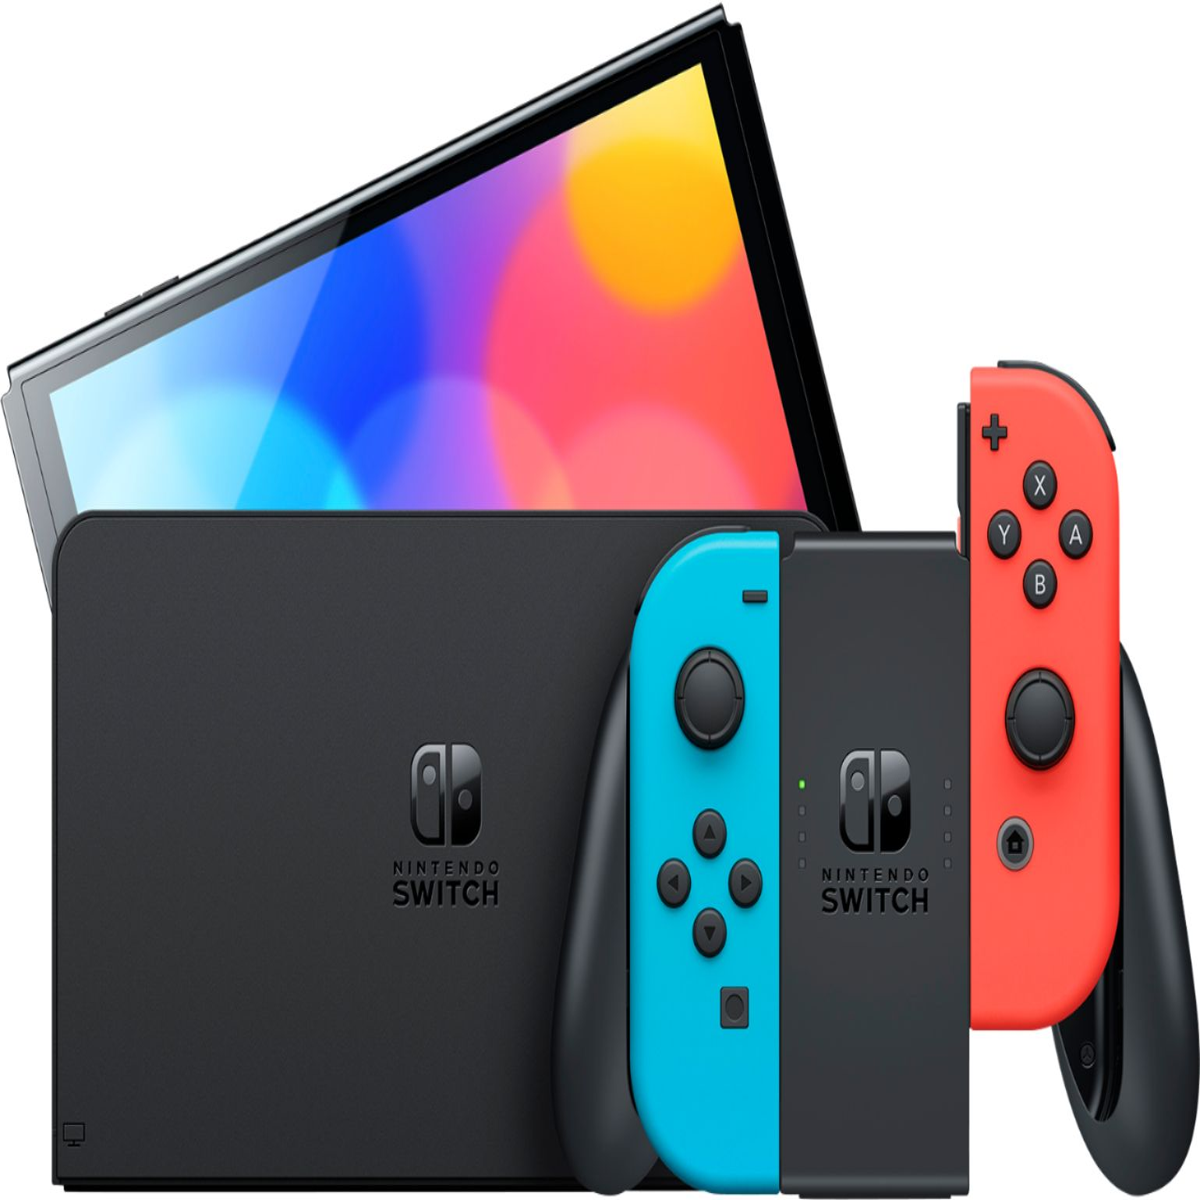 Nintendo Switch OLED deal ahead of Black Friday gets you a $75